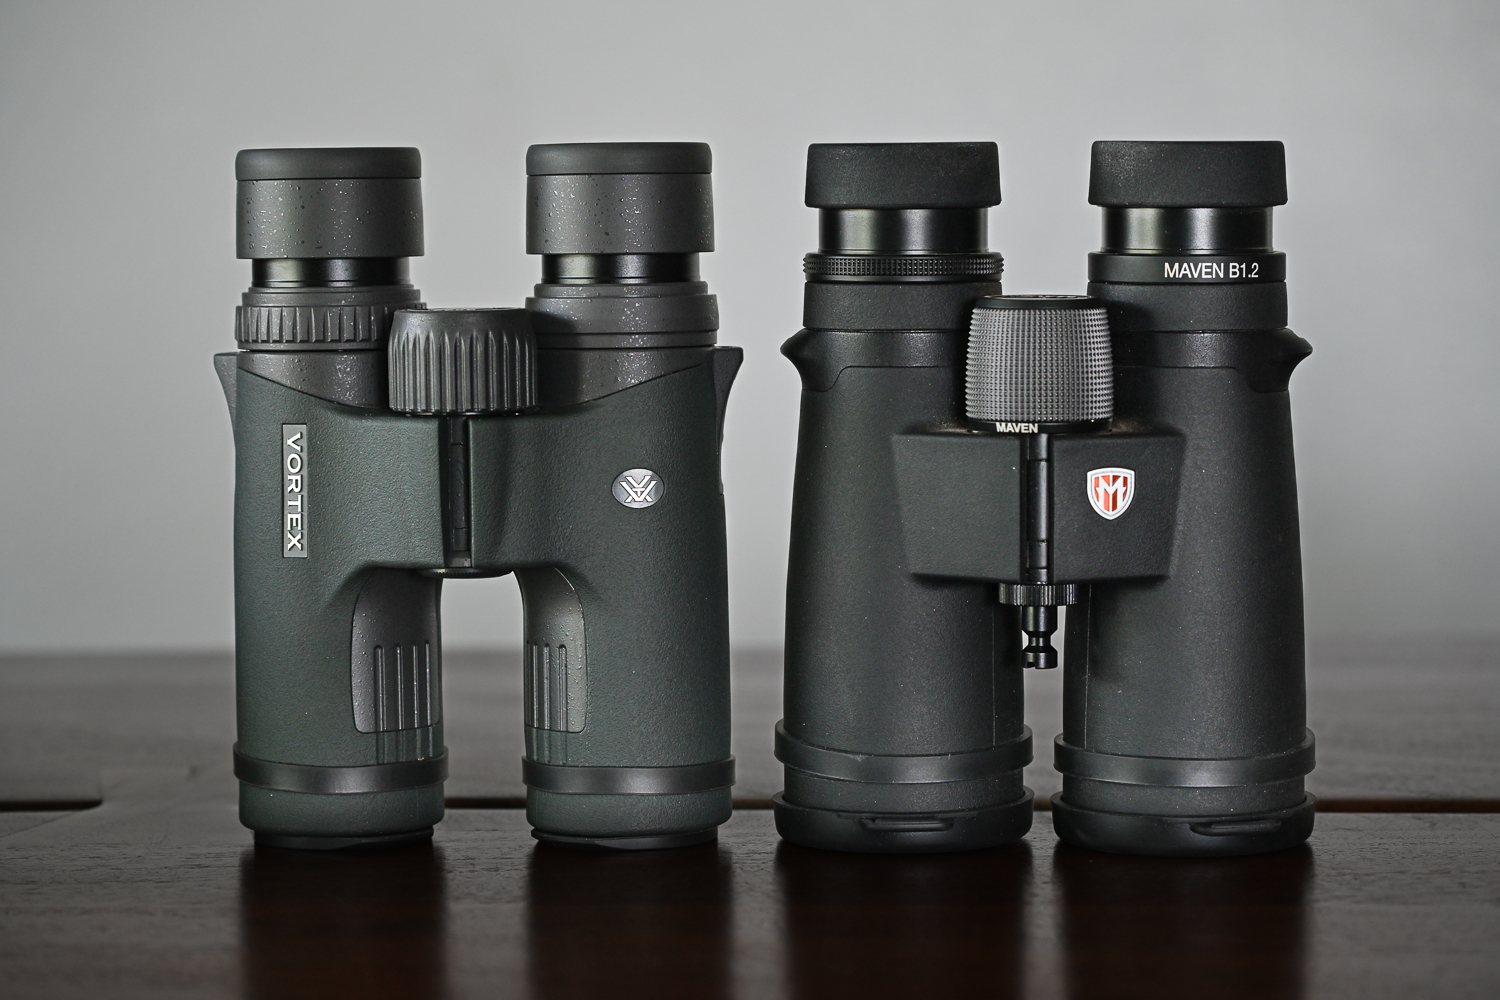 The Razor UHD 32mm binoculars are roughly the same size as the Maven B1.2, although the Razor is lighter.